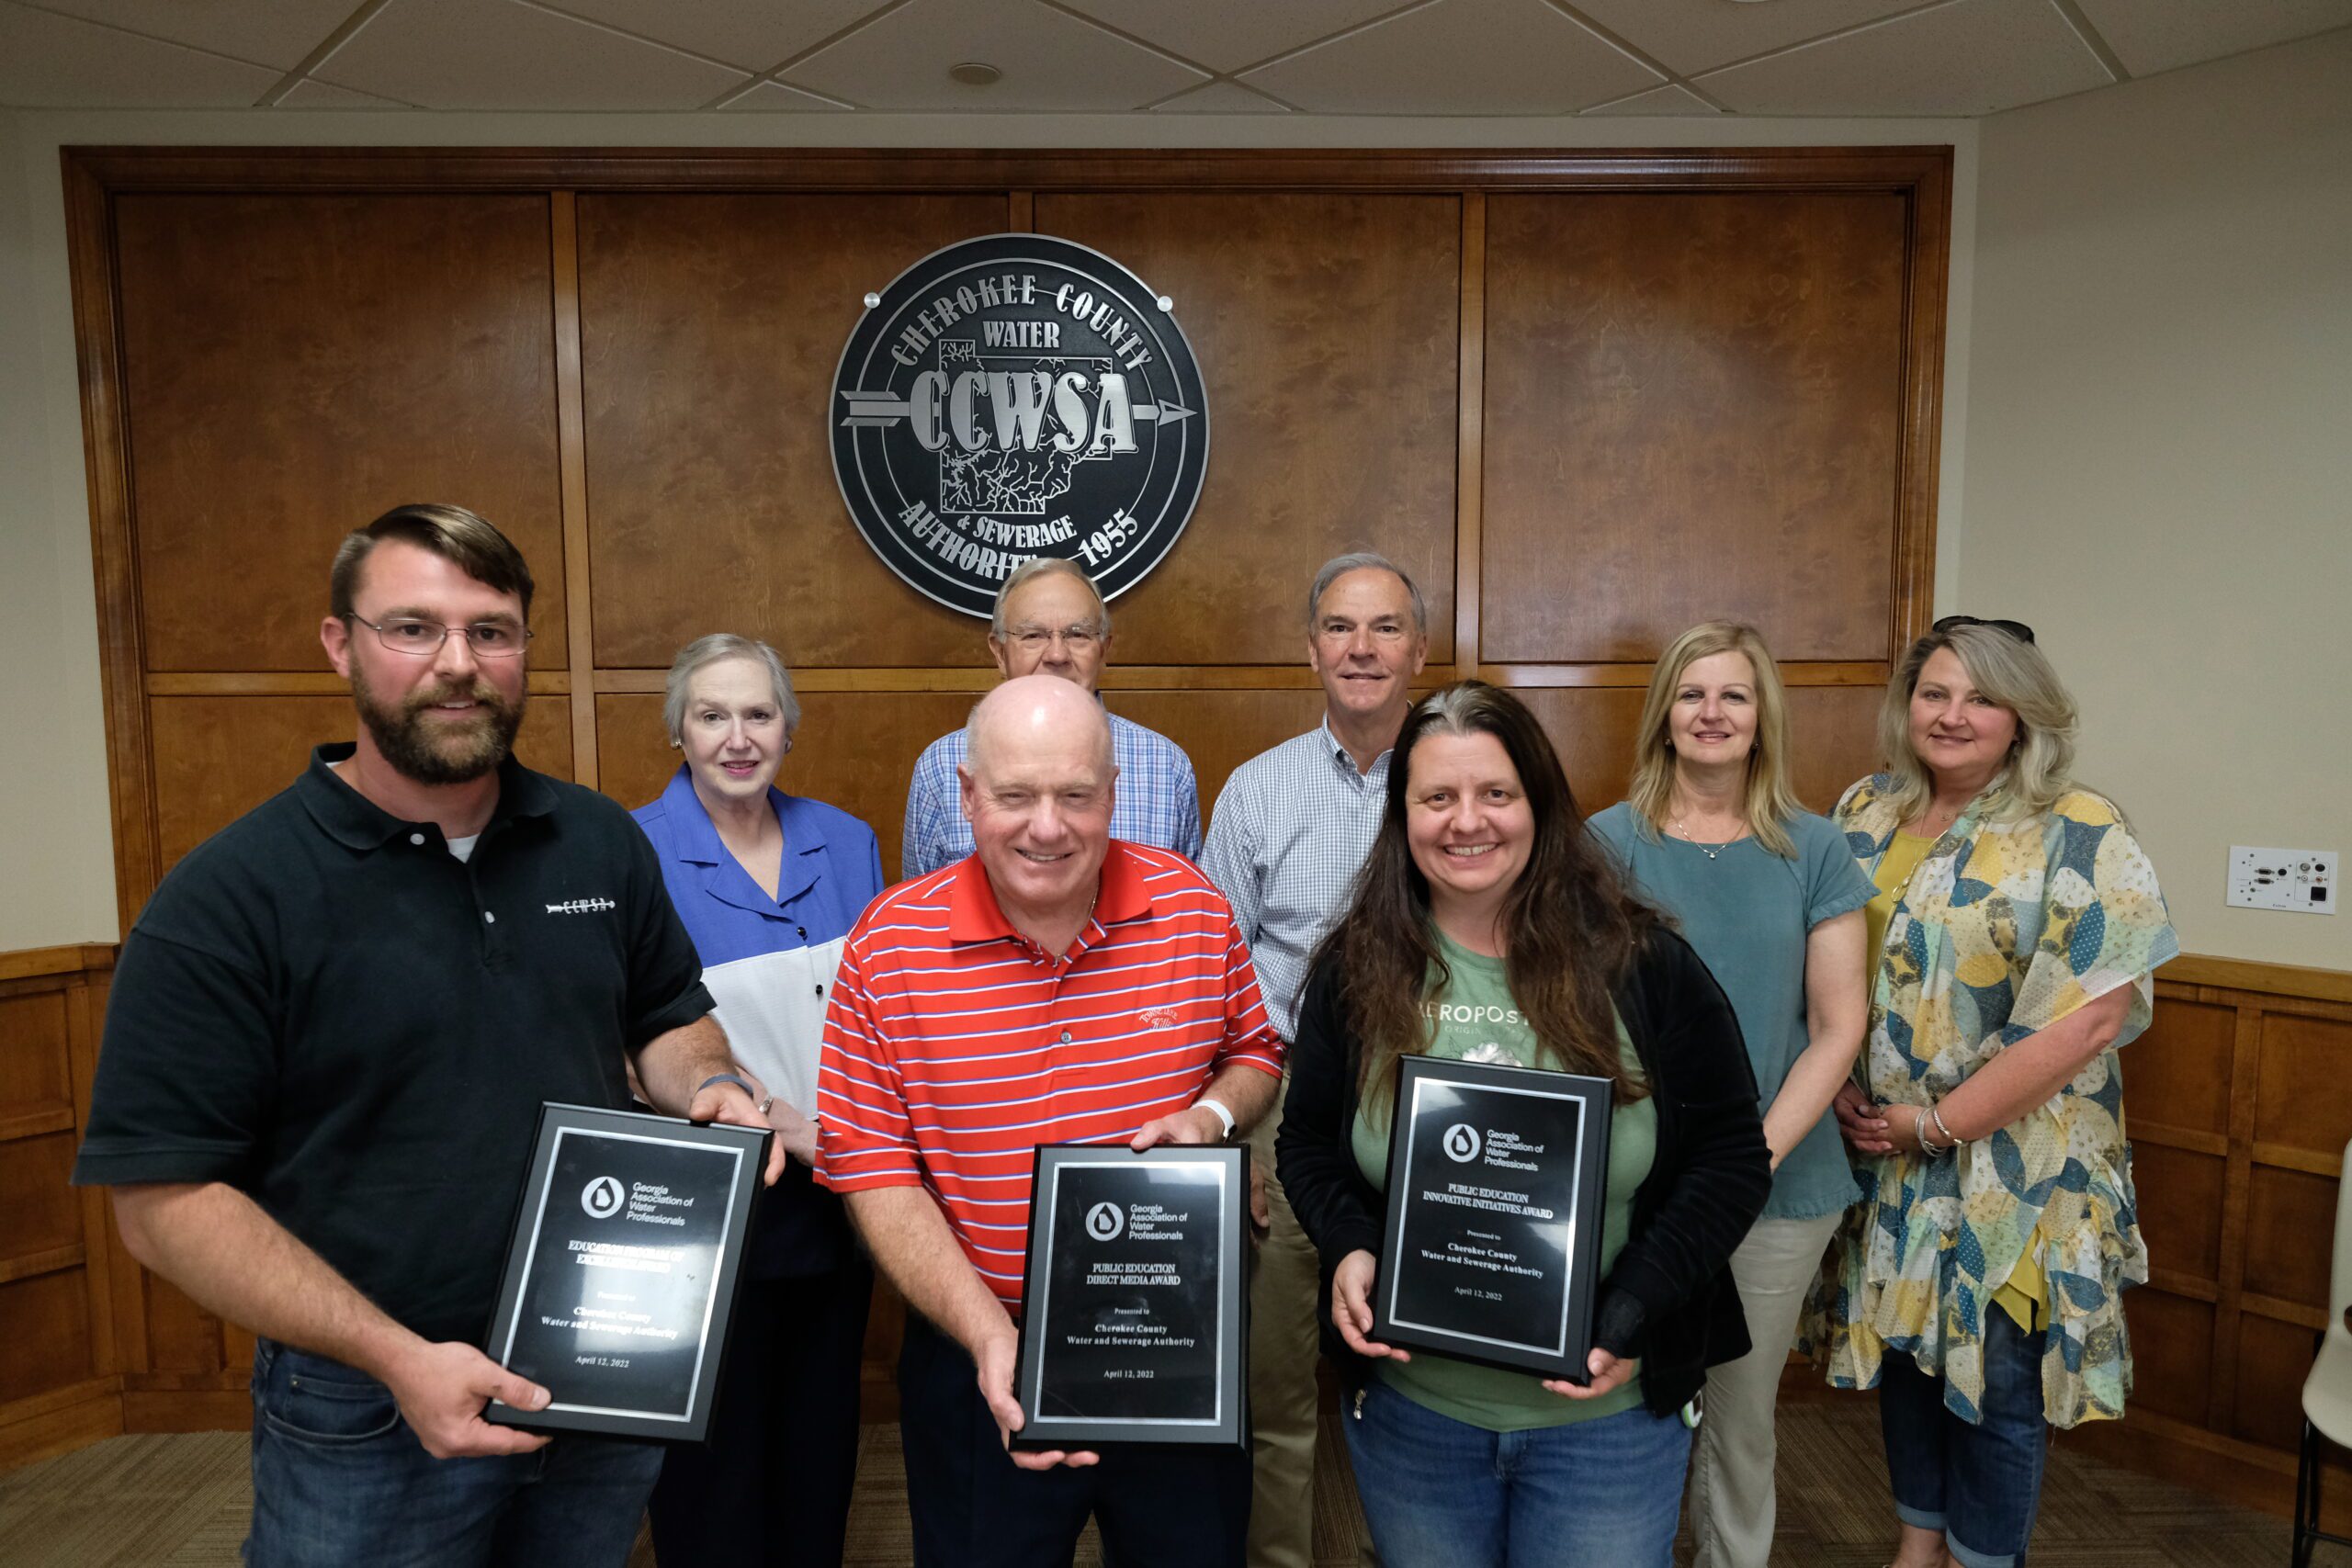 CCWSA awarded for excellent education program by Georgia Association of Water Professionals! Congratulations to CCWSA Education for receiving three education awards at the Spring GAWP conference!